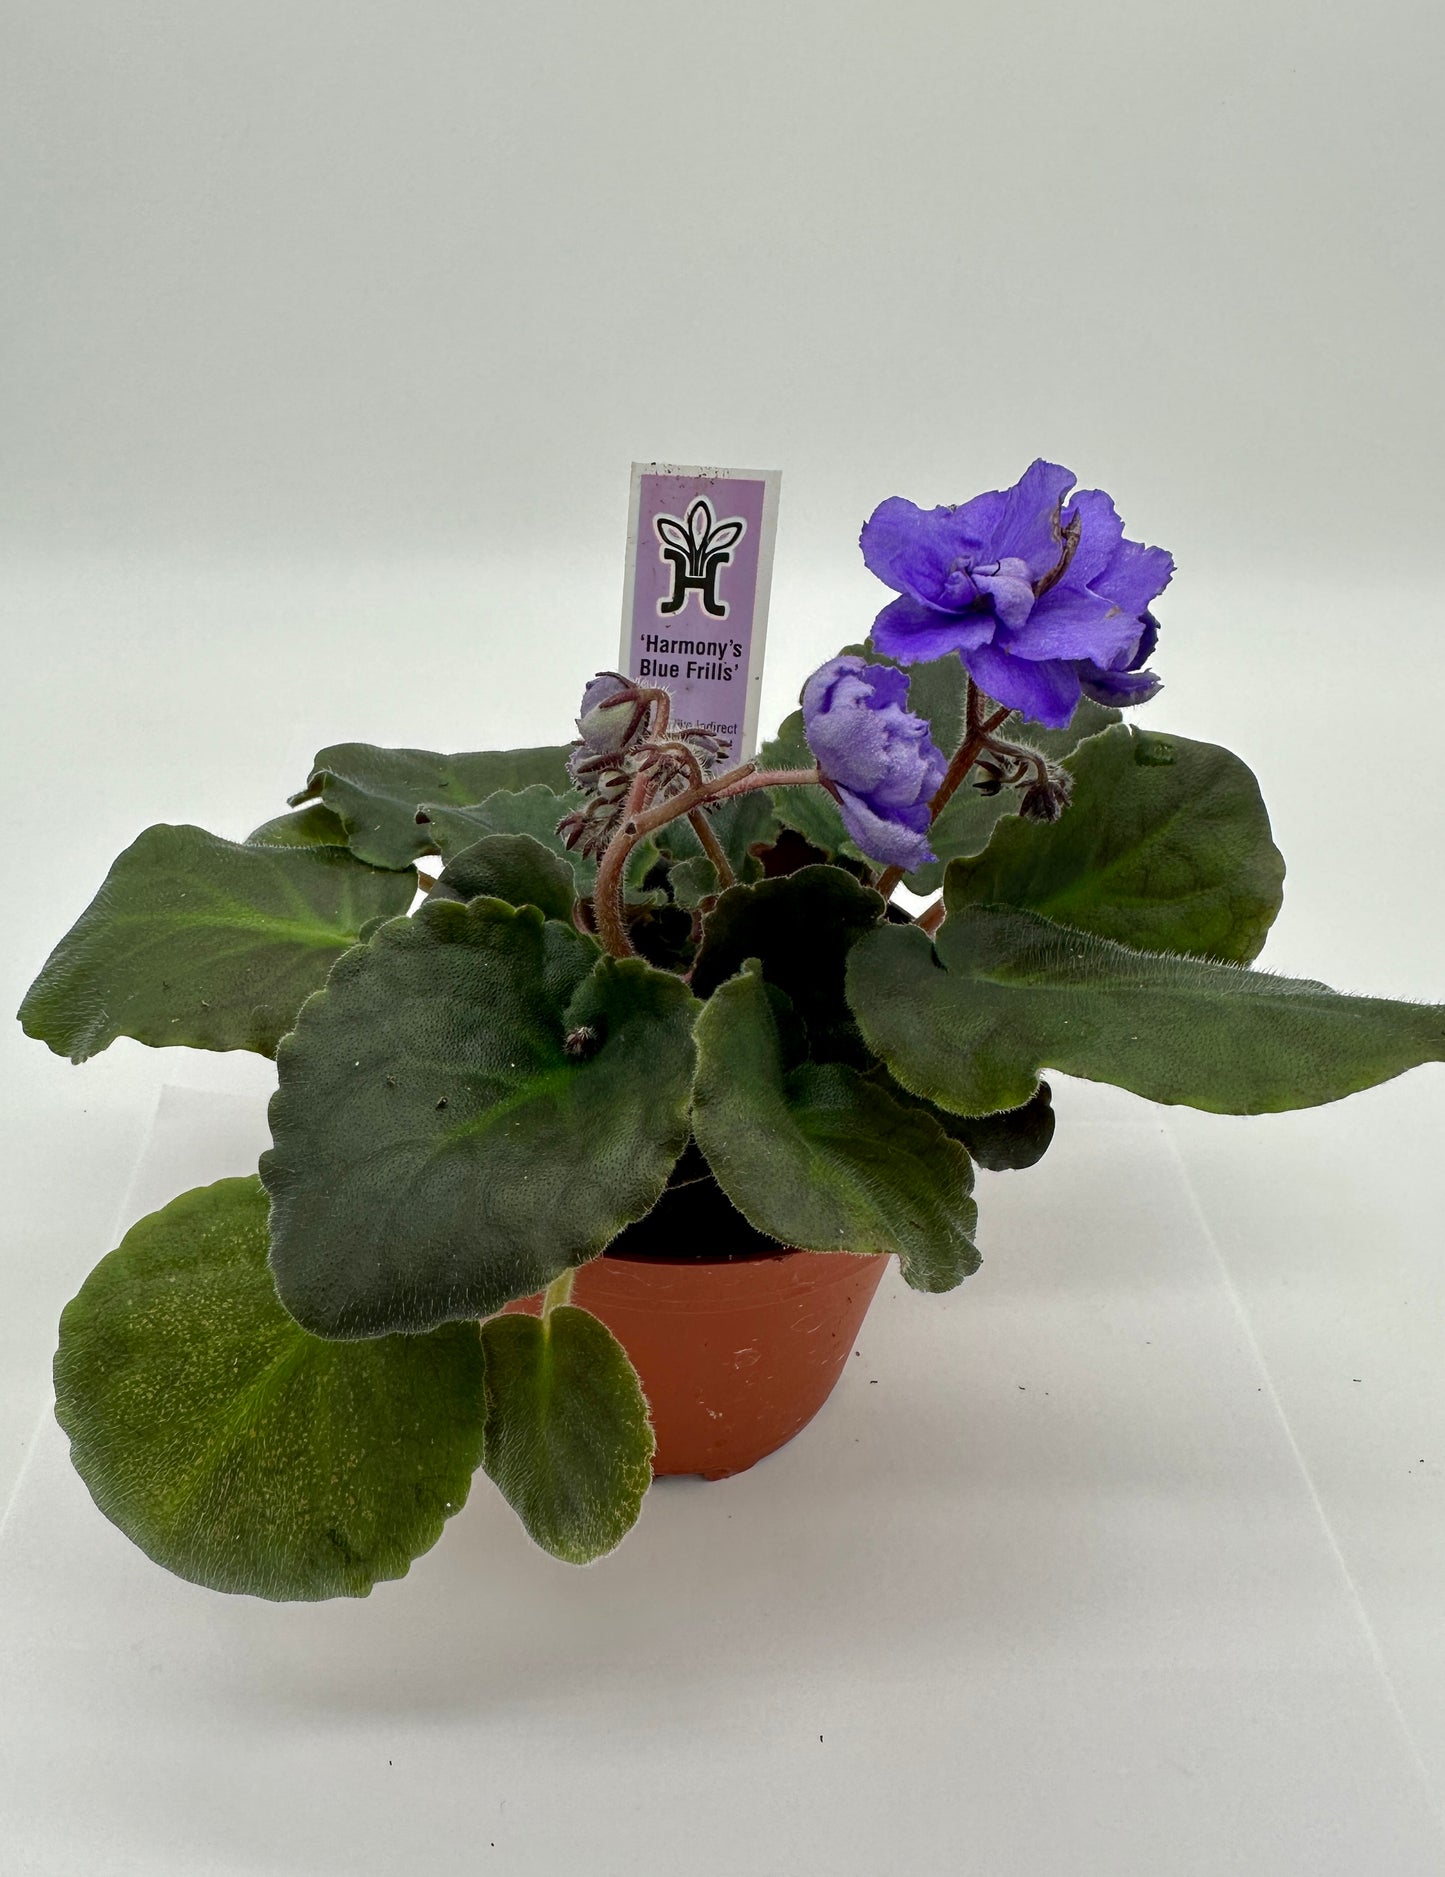 Harmony's Blue Frills - Live African Violet 4"